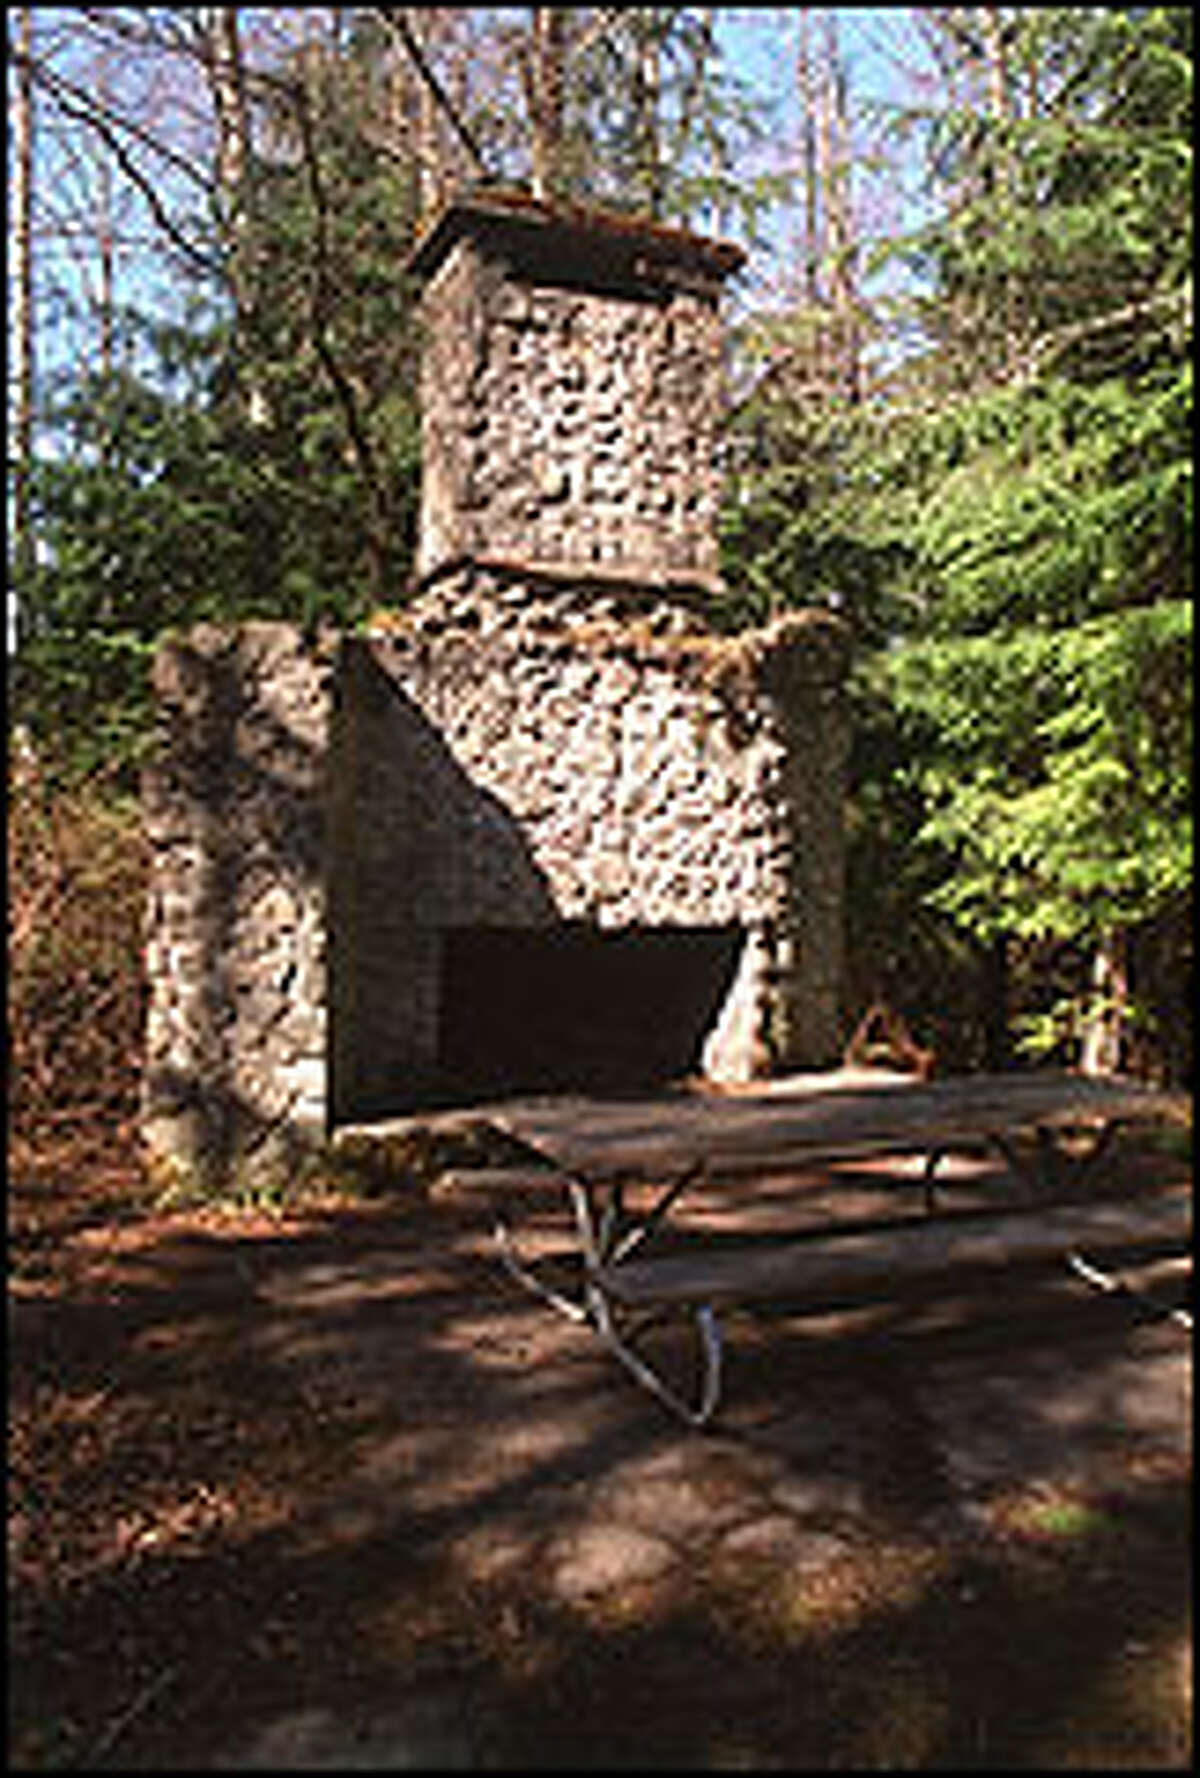 The fireplace and chimney are all that remain of the old Bullitt family homestead on Squak Mountain, now an excellent trailside picnic spot.